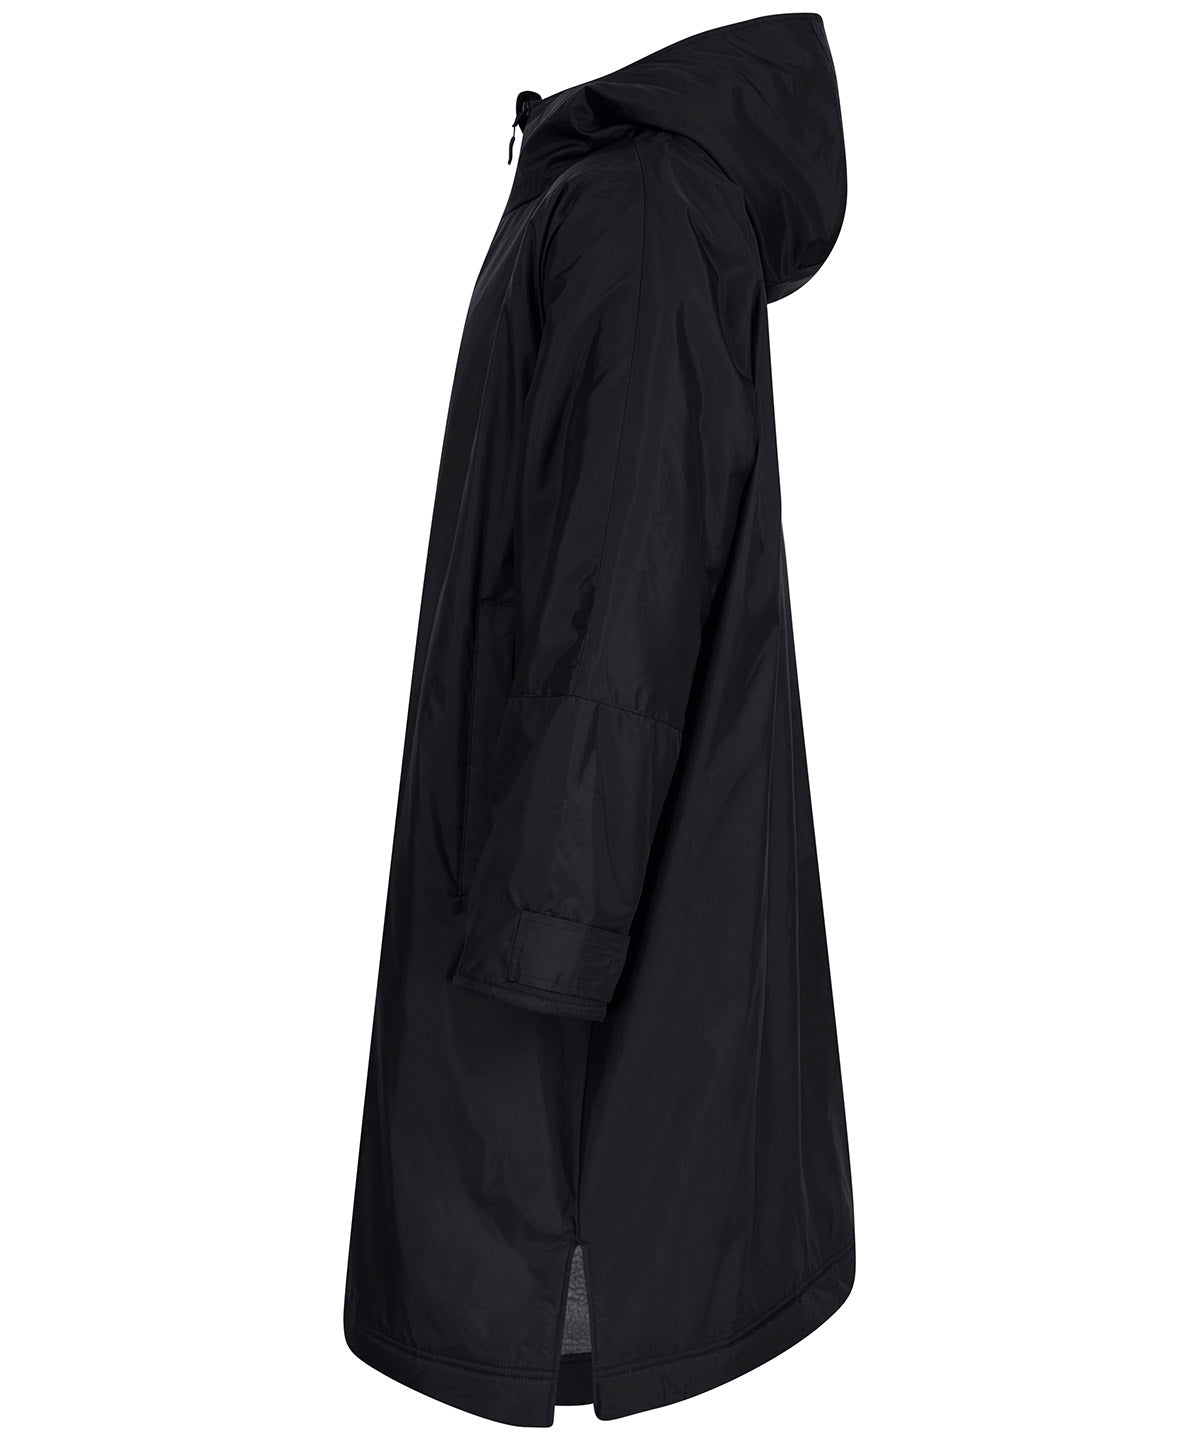 Great Tew Athletic Weatherproof Changing Robe (also known as Dry Robes)